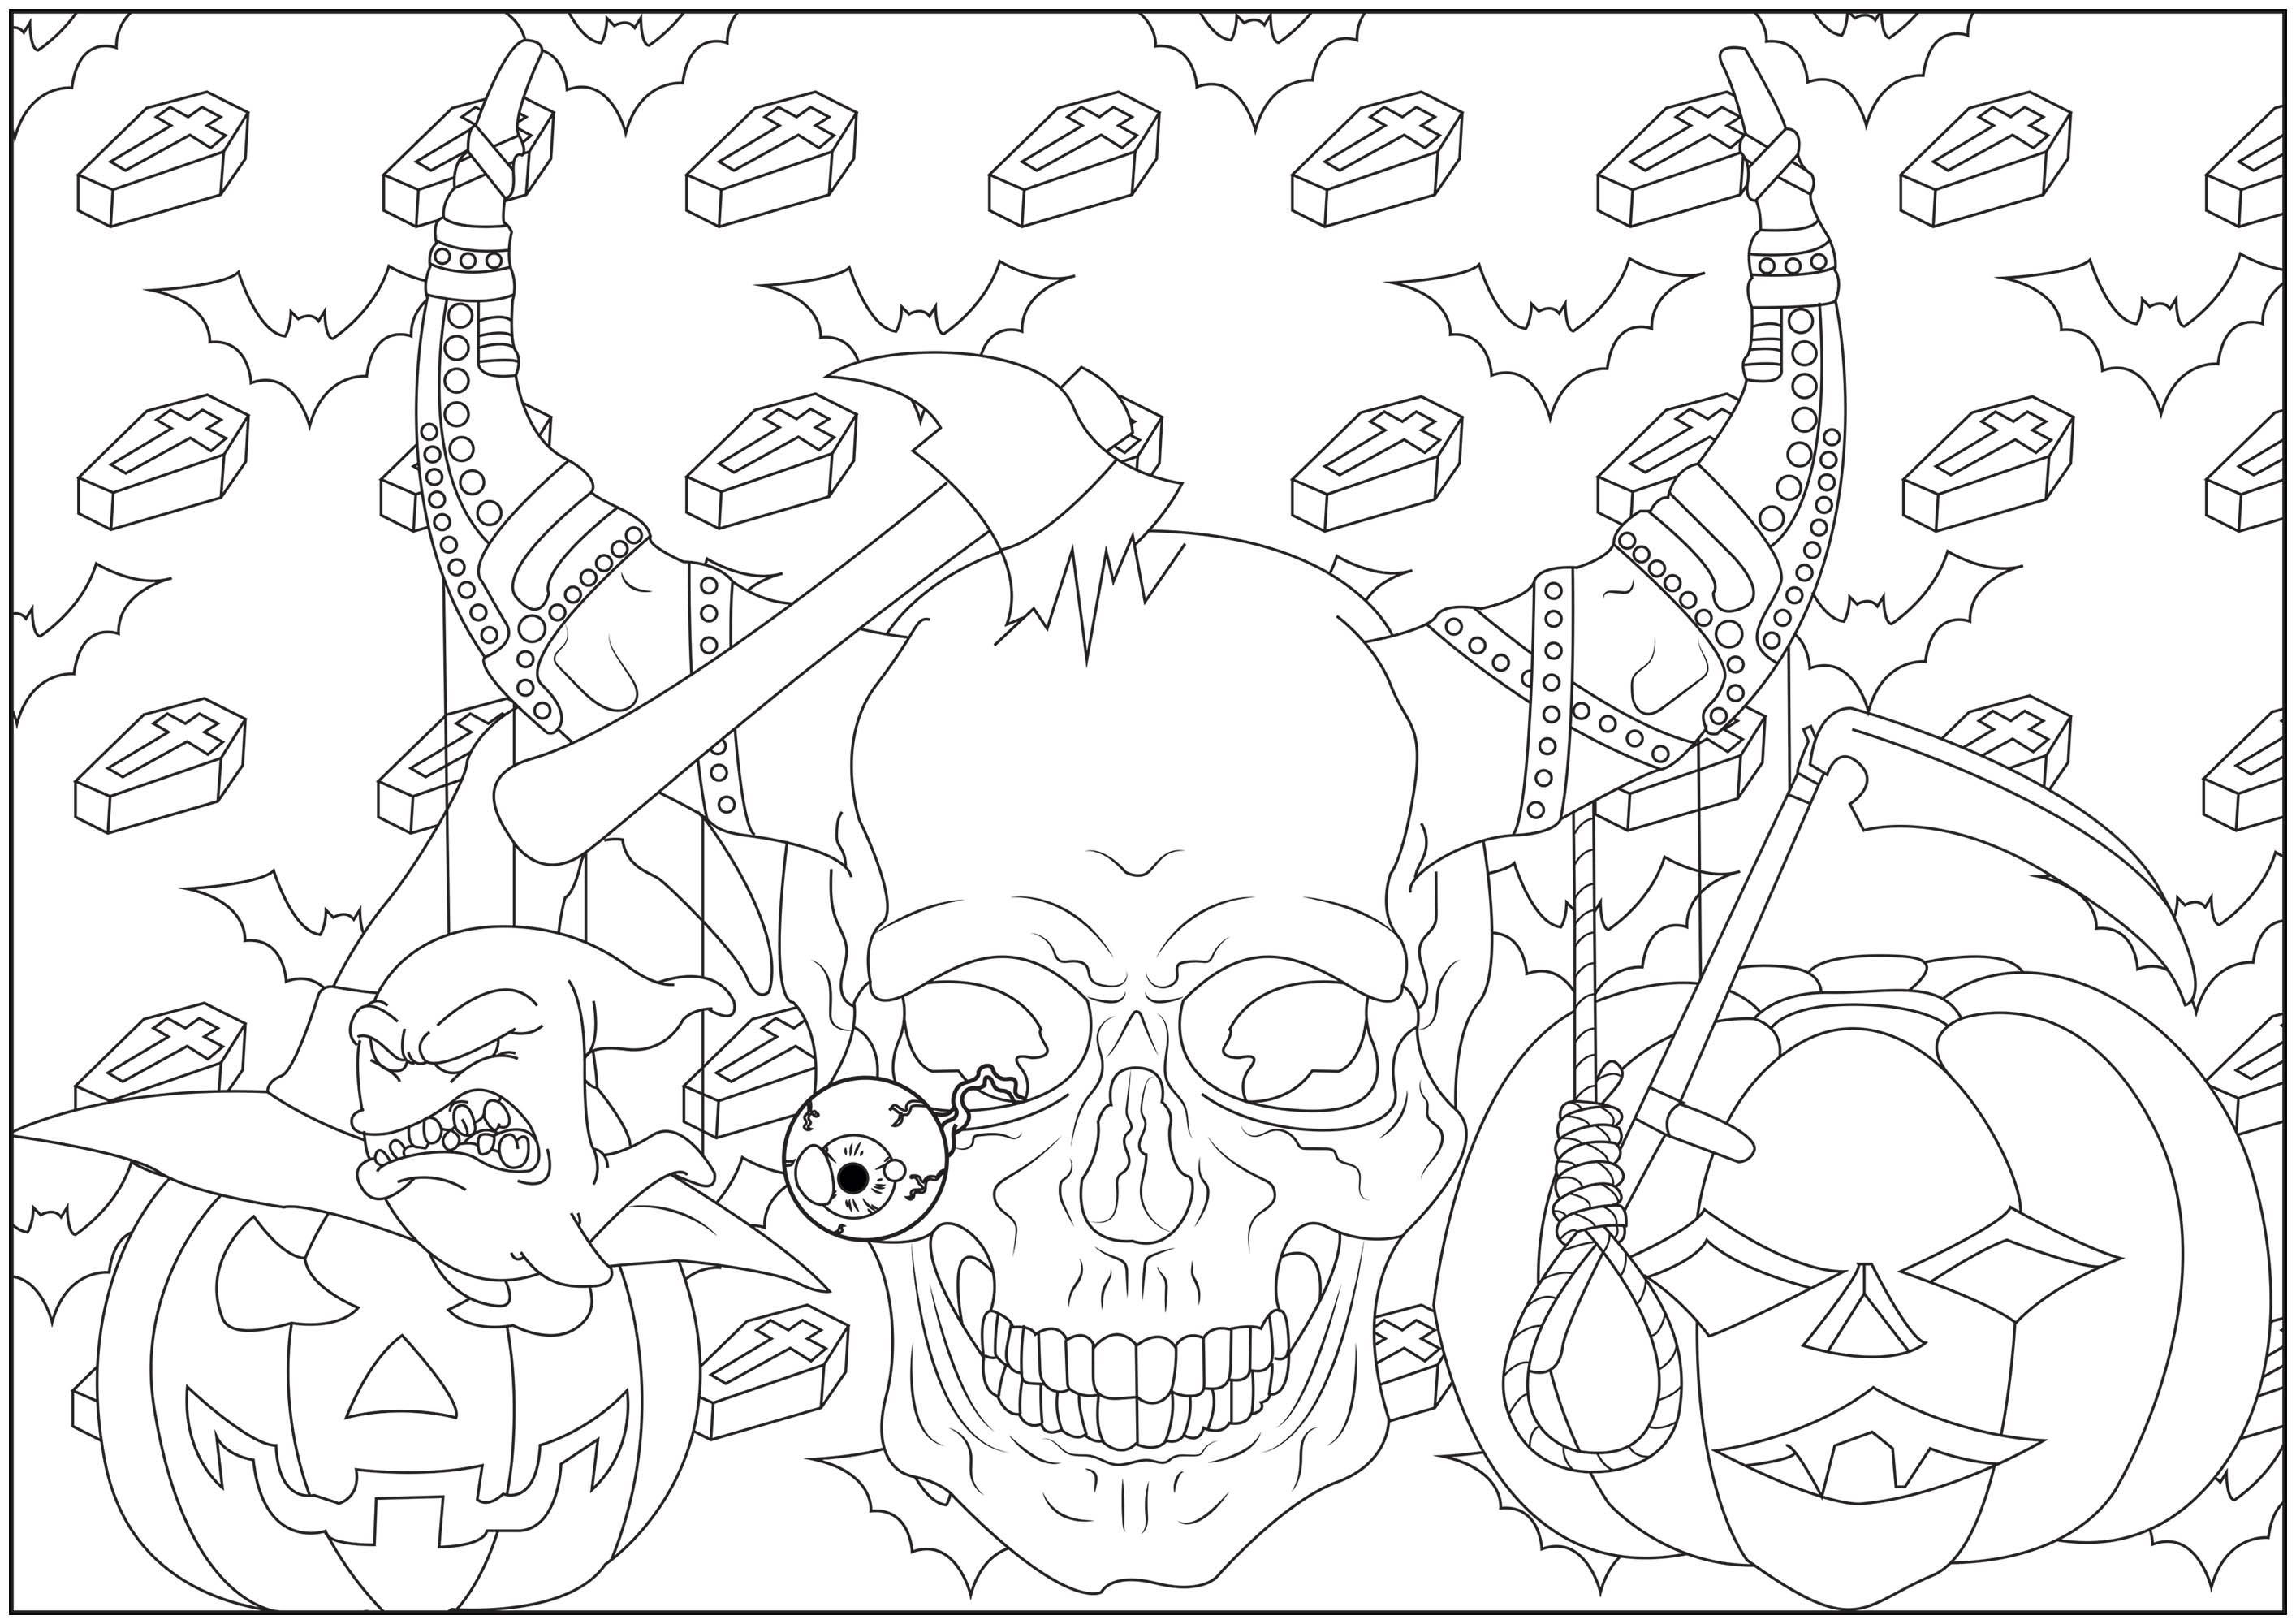 Download Skull Coloring Pages For Adults